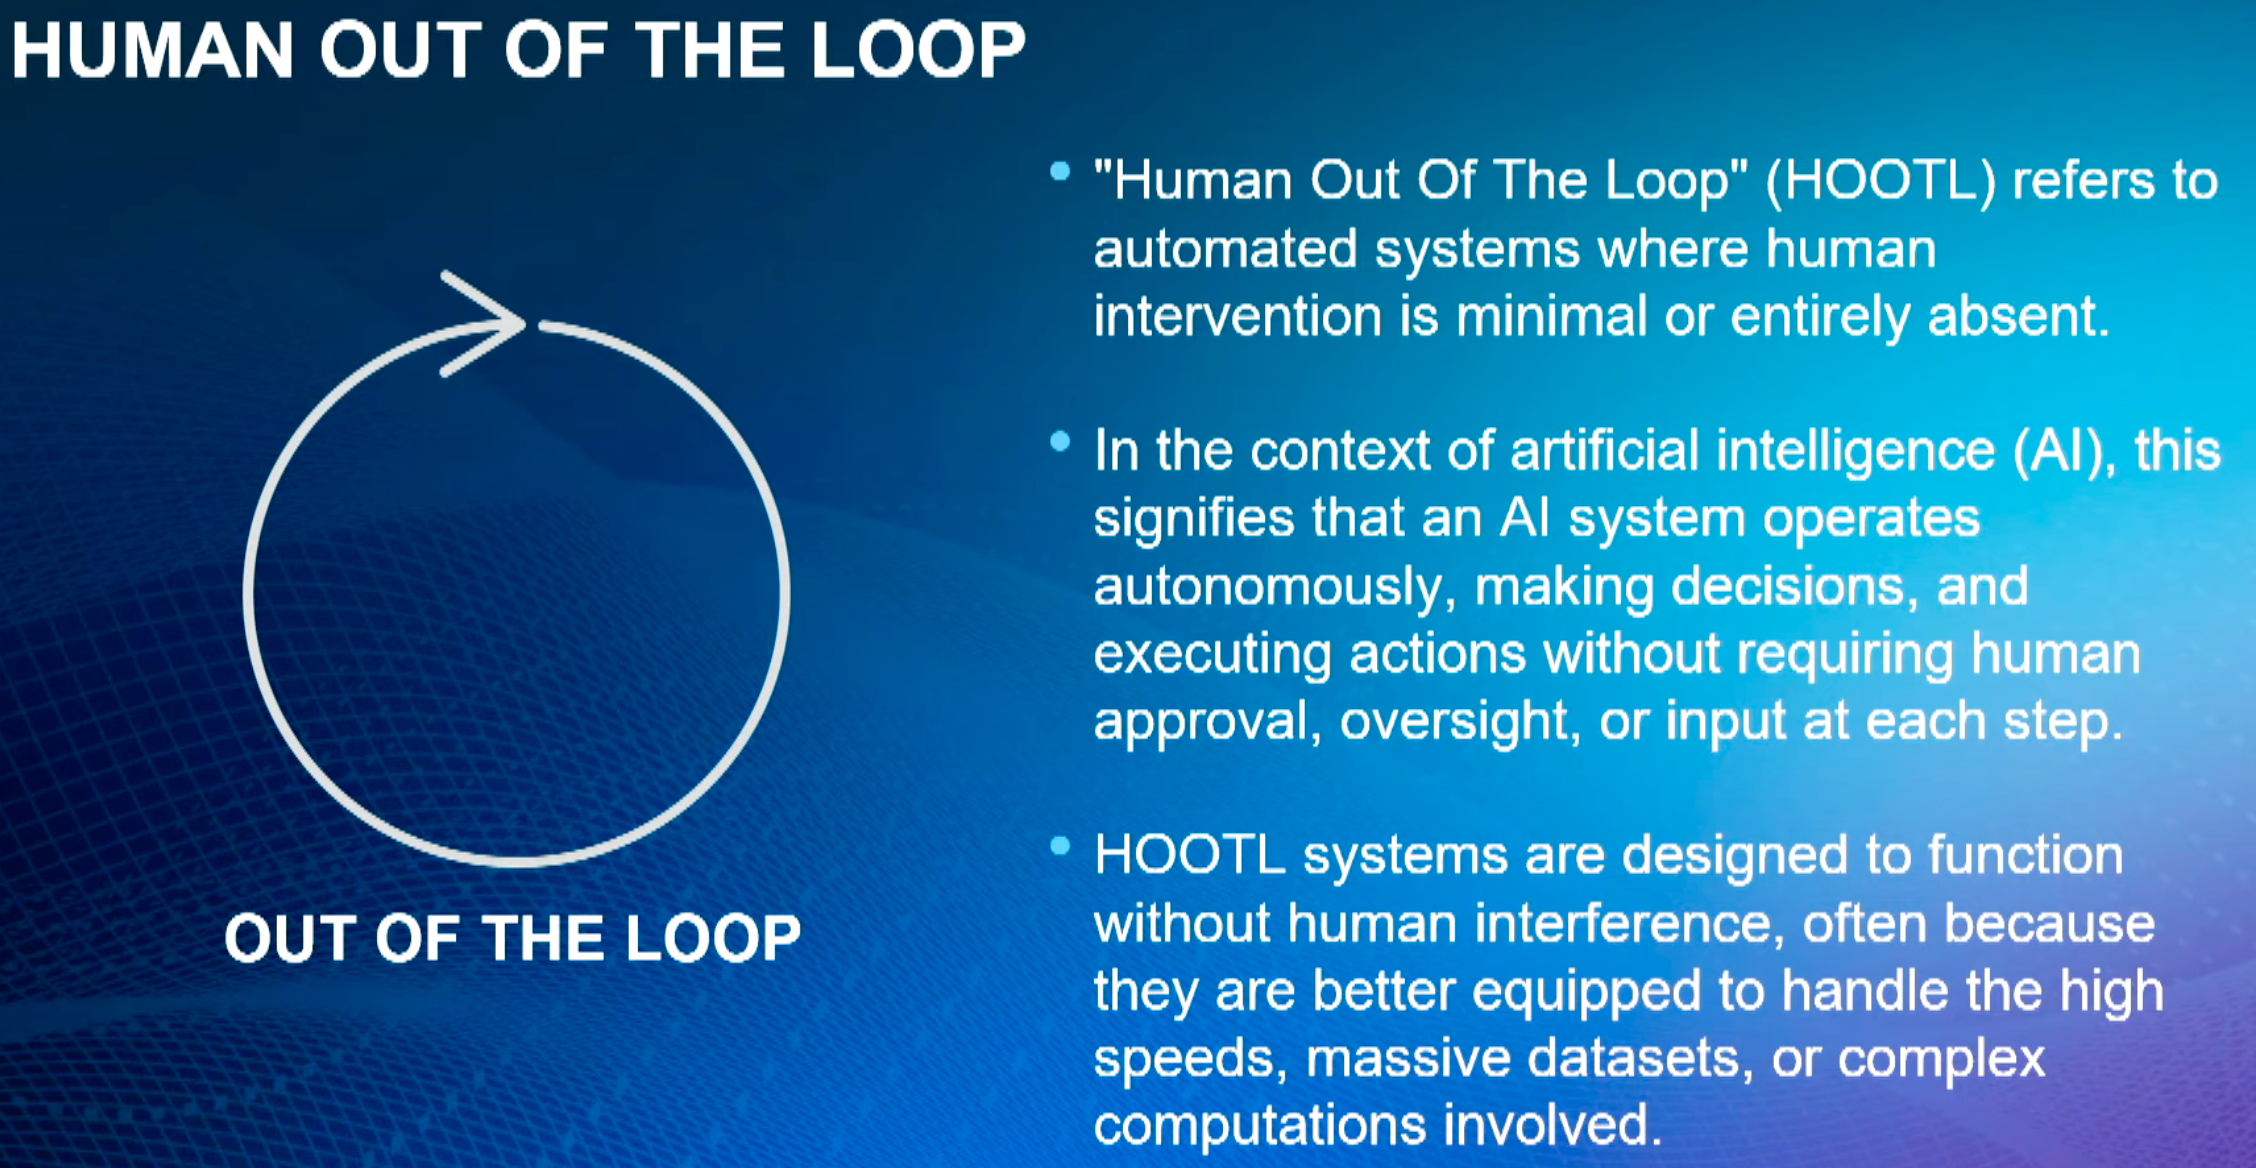 Image illustrating "humans out of the loop" (HOOTL), a system where AI handles the operation without humans